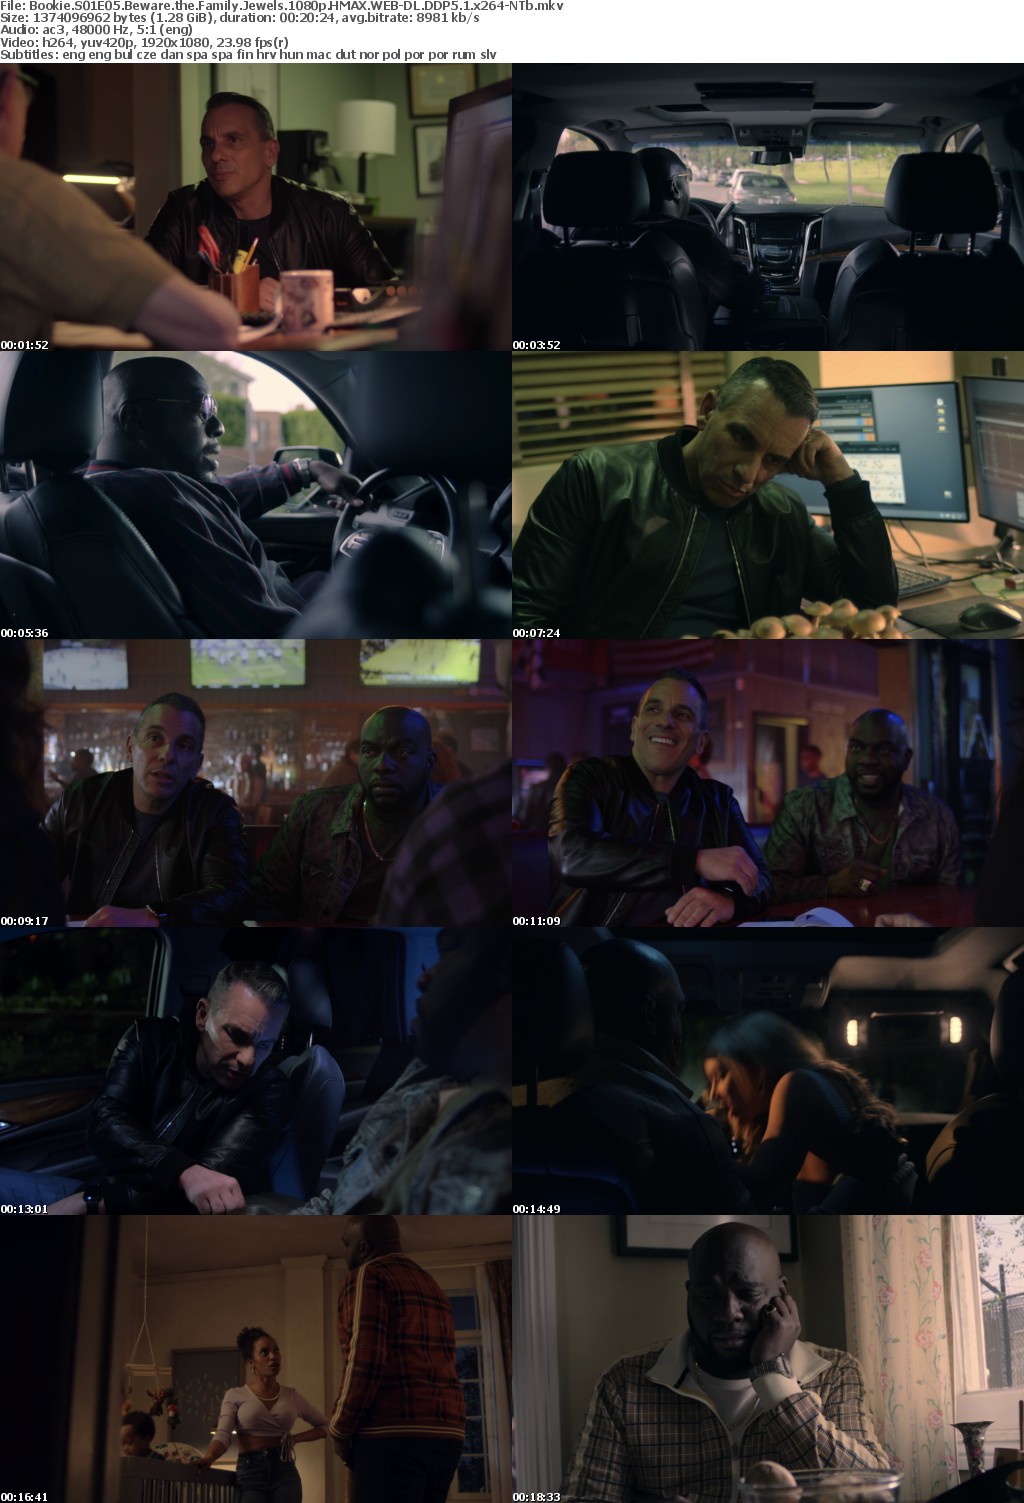 Bookie S01E05 Beware the Family Jewels 1080p HMAX WEB-DL DDP5 1 x264-NTb